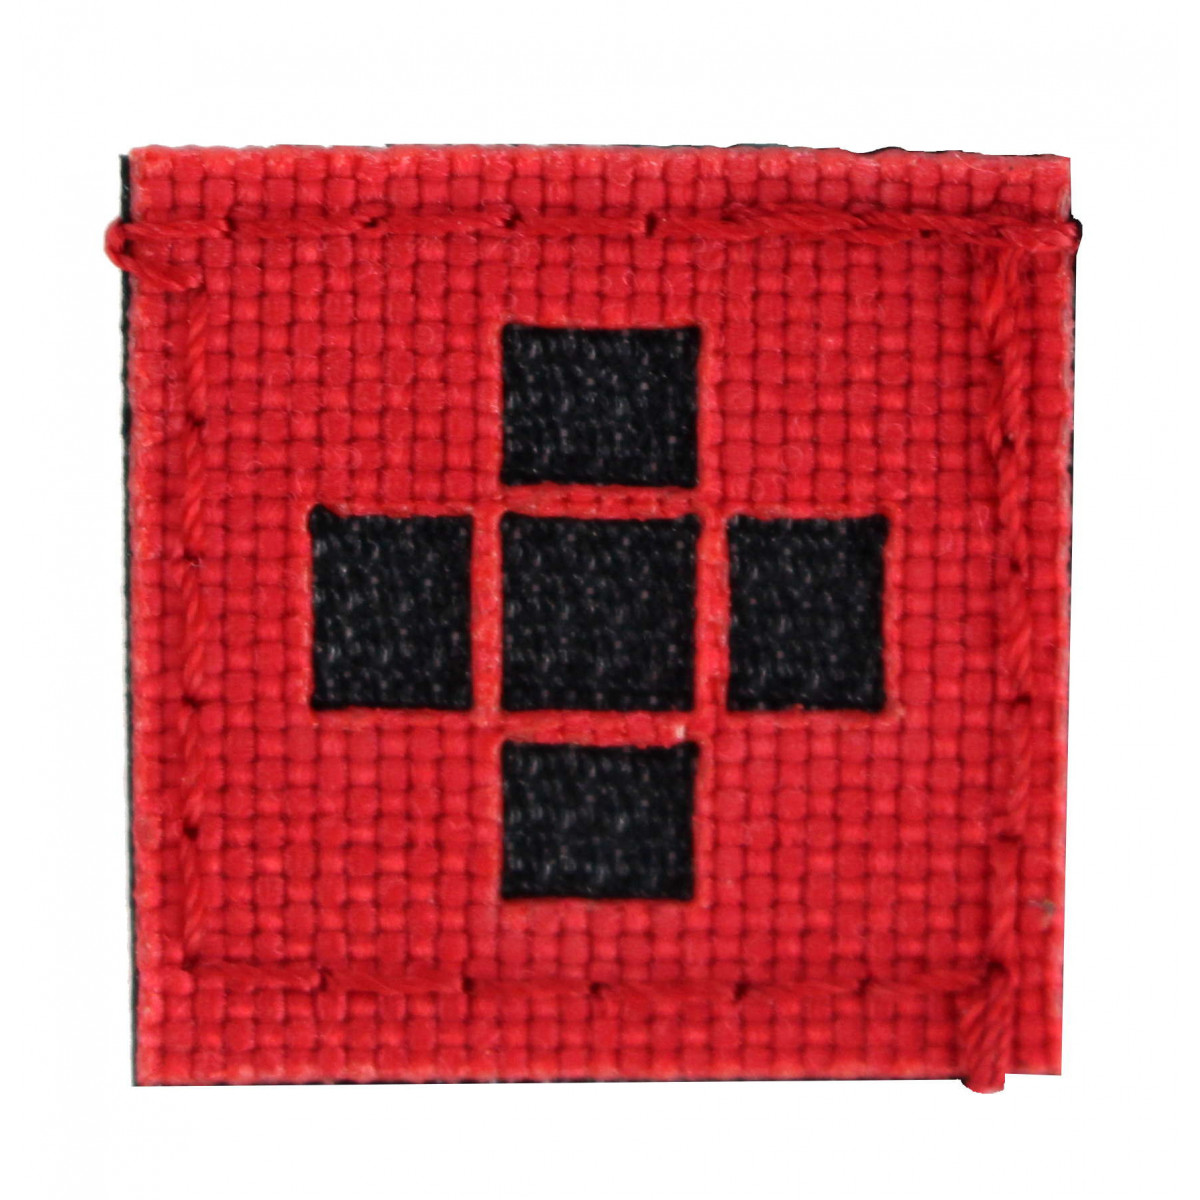 Red Cross small